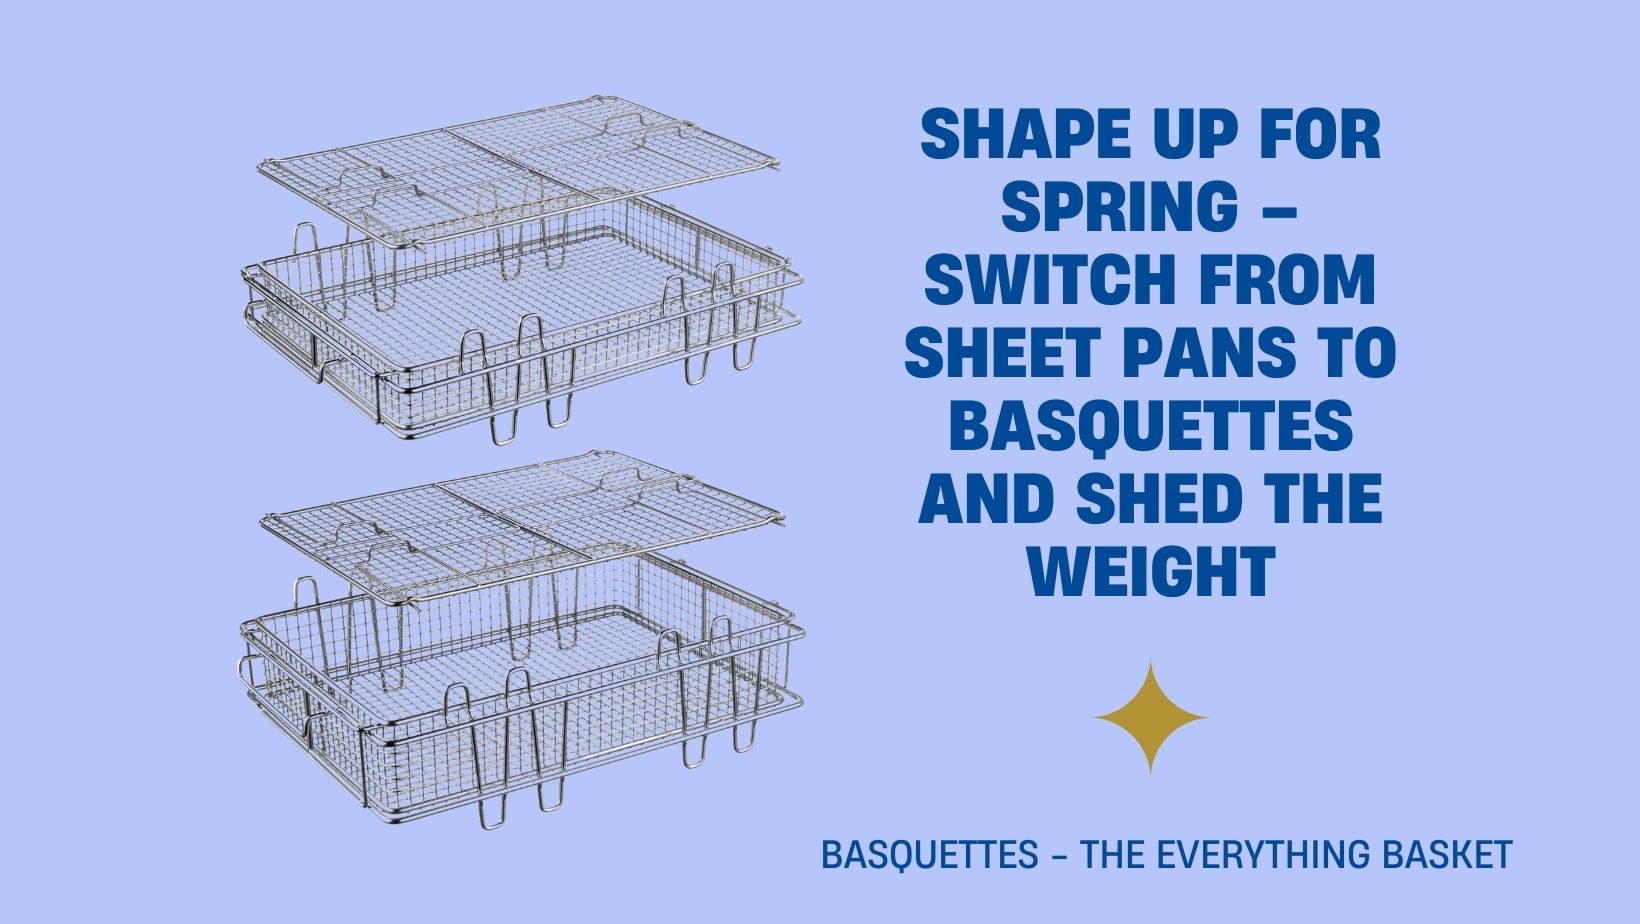 Shape Up For Spring - Consume Less Grease with Basquettes